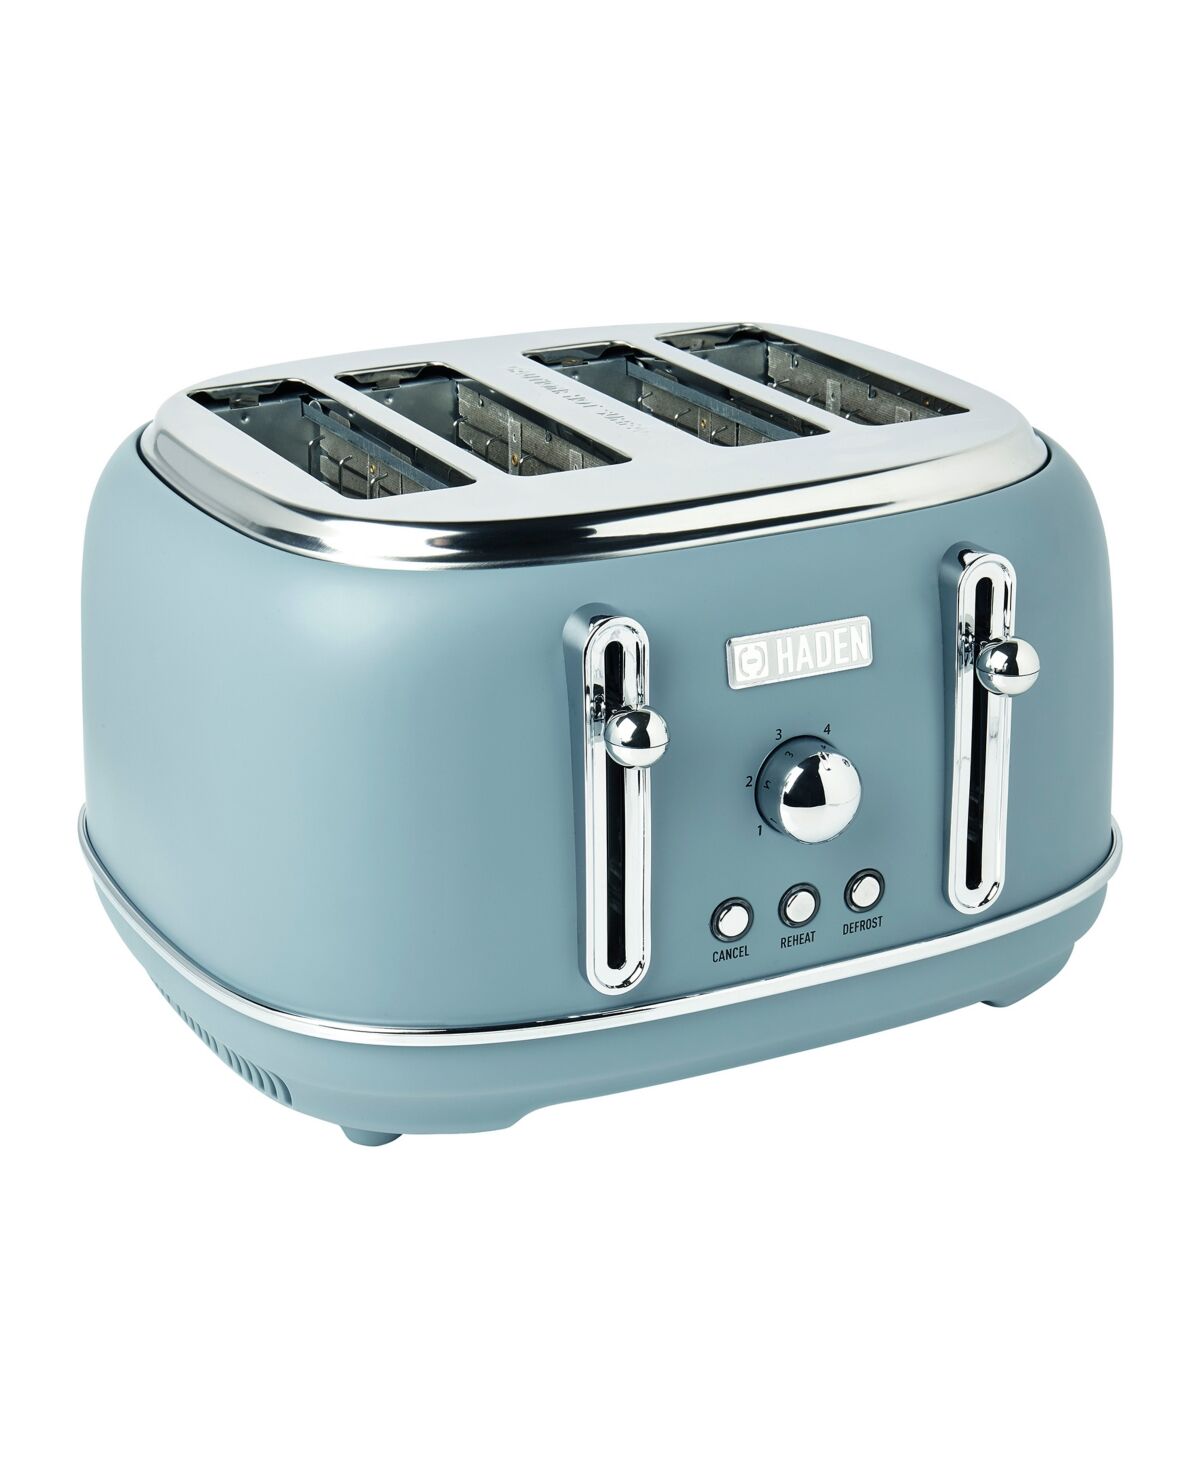 Haden Highclere 4-Slice, Wide Slot Toaster with Bagel and Defrost Settings Browning Control - 75026 - Poole Blue